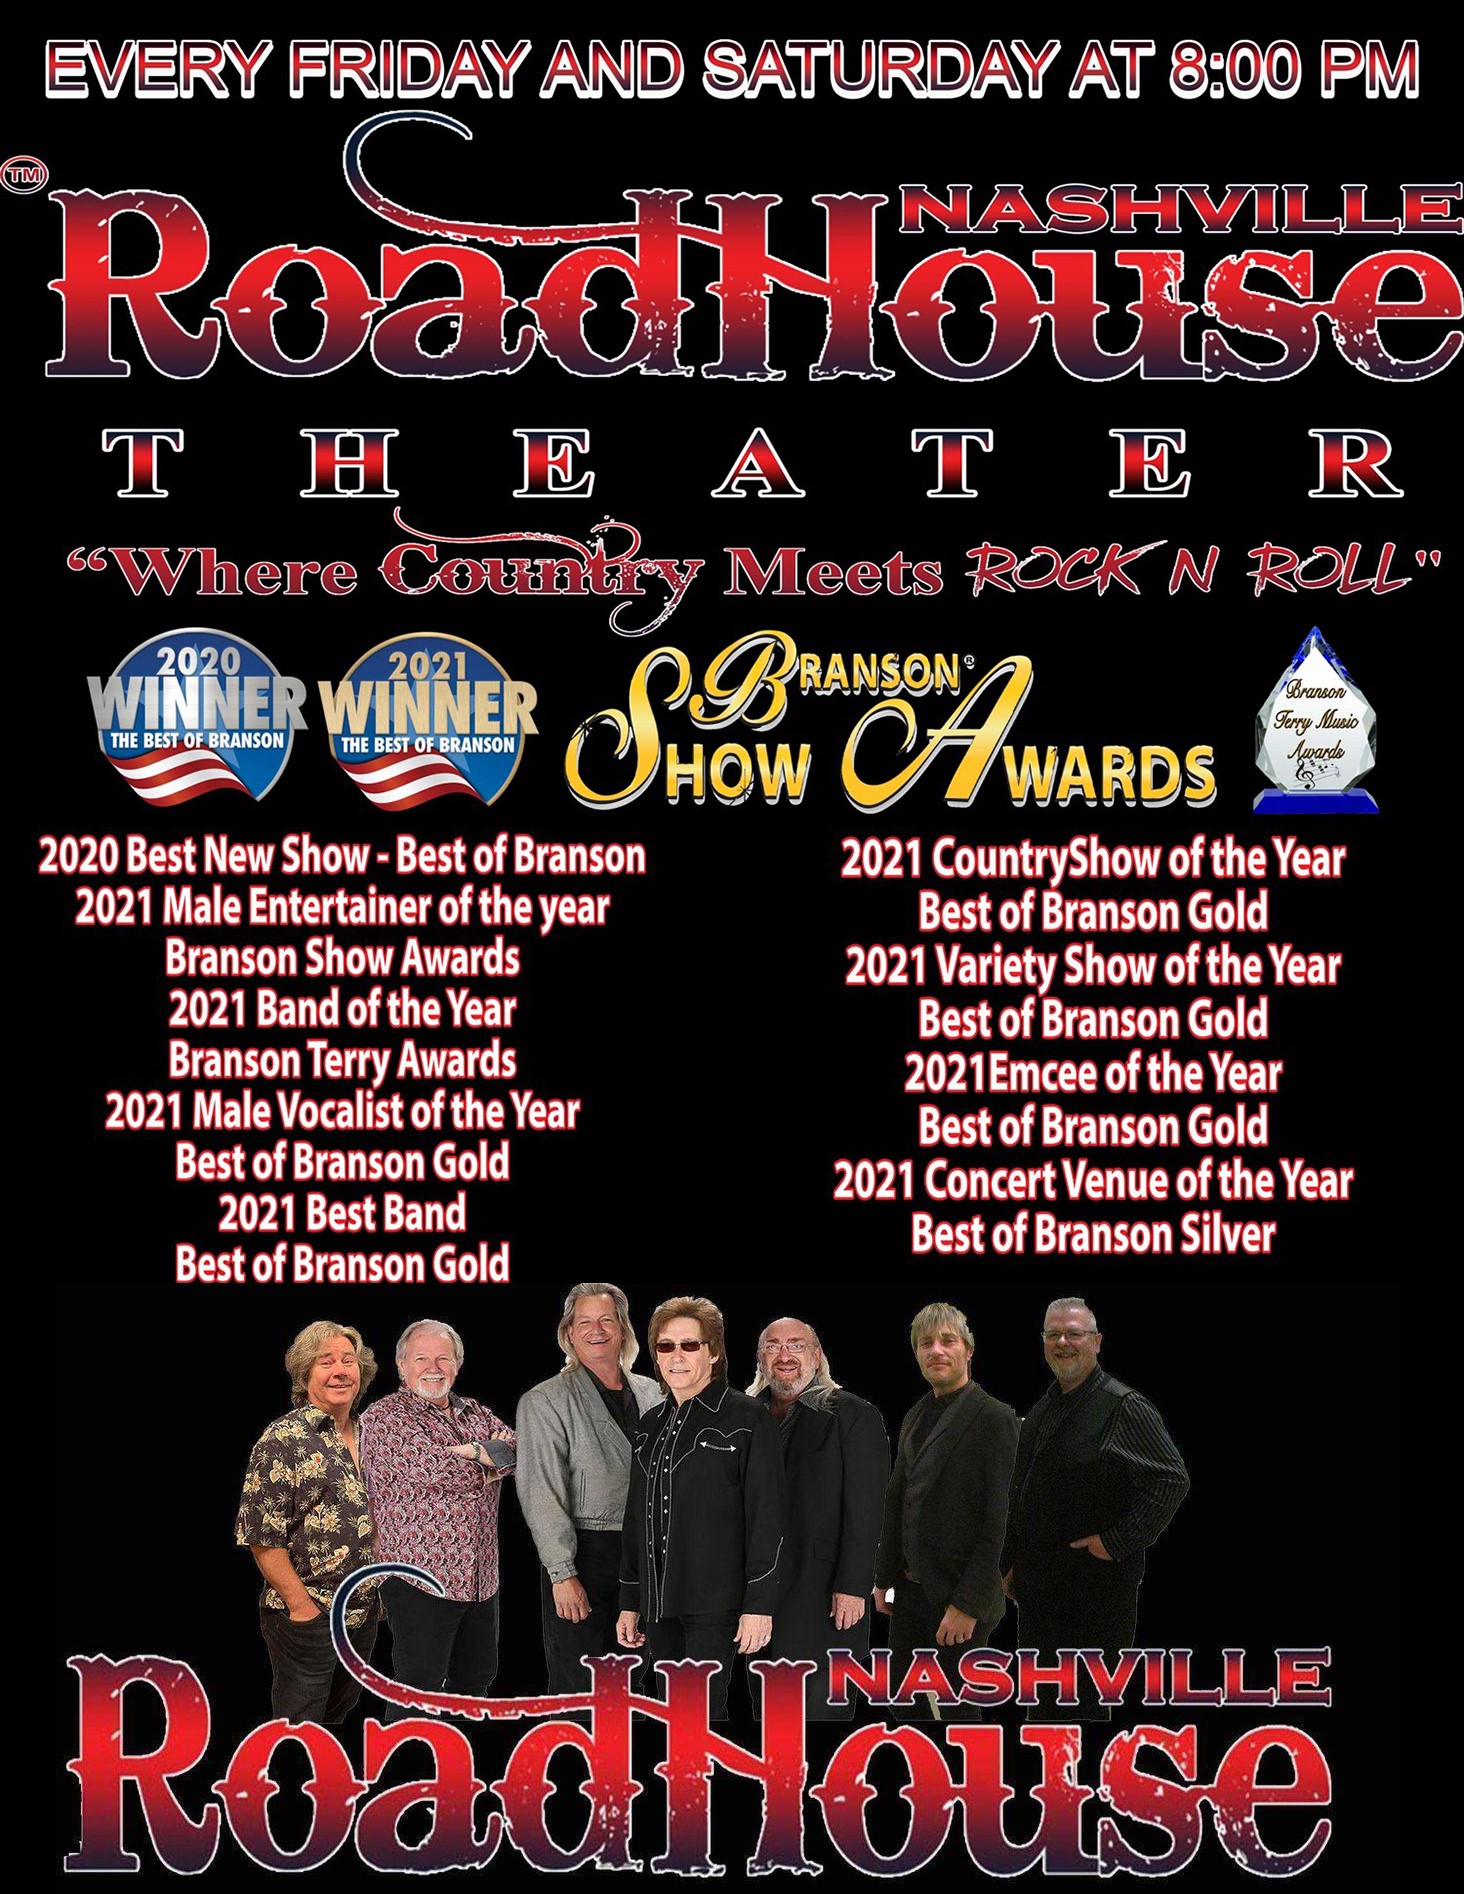 Nashville Roadhouse Live Where Country Meets Rock N Roll on Jan 02, 00:00@Nashville Roadhouse Theater at The Branson Star - Pick a seat, Buy tickets and Get information on nashvilleroadhouse.com bransonstartheater